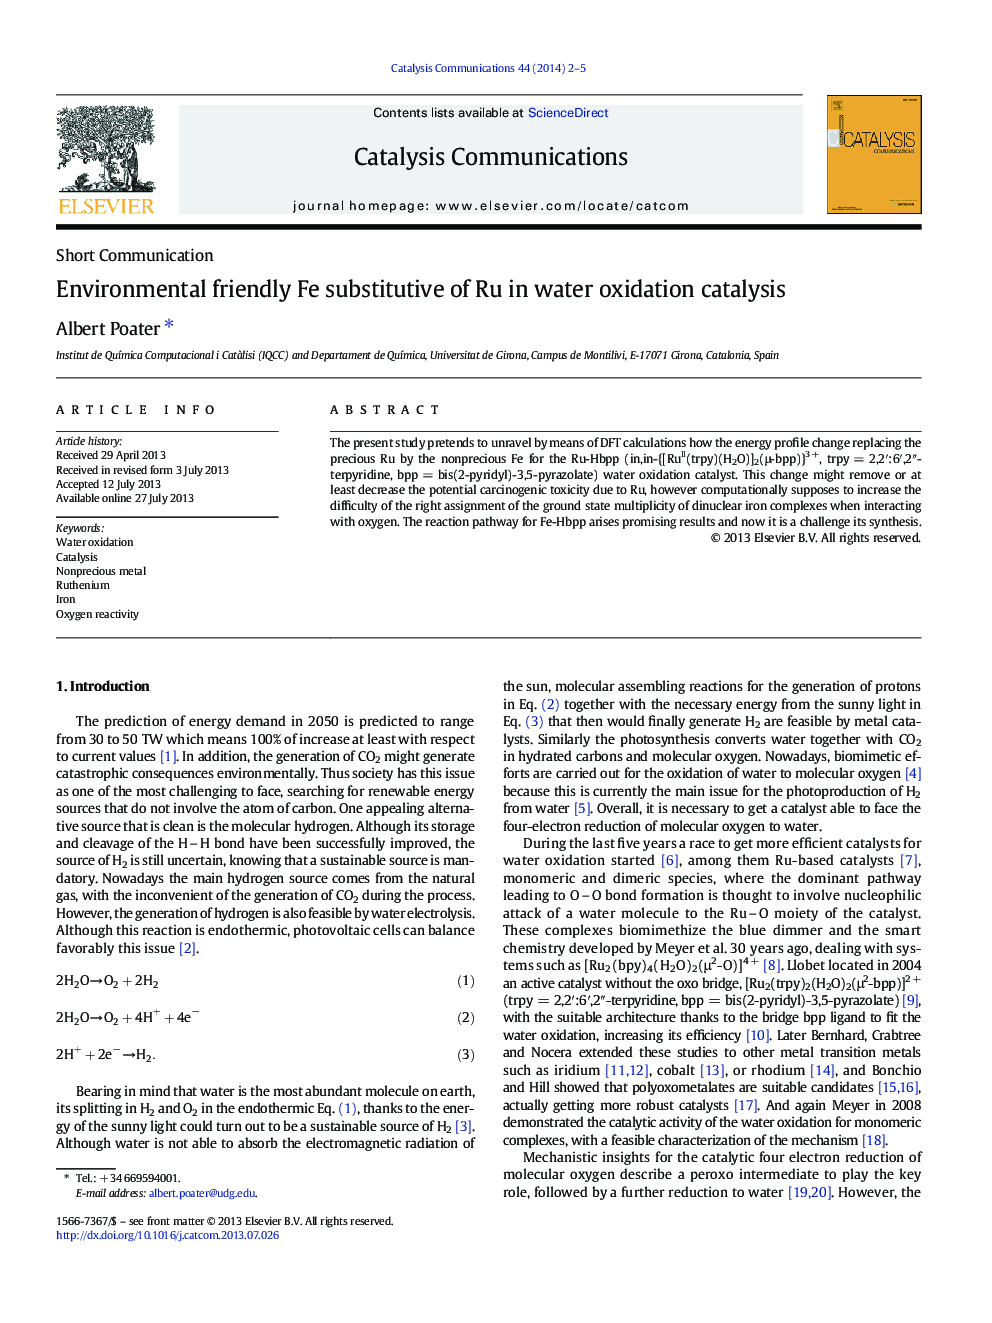 Environmental friendly Fe substitutive of Ru in water oxidation catalysis